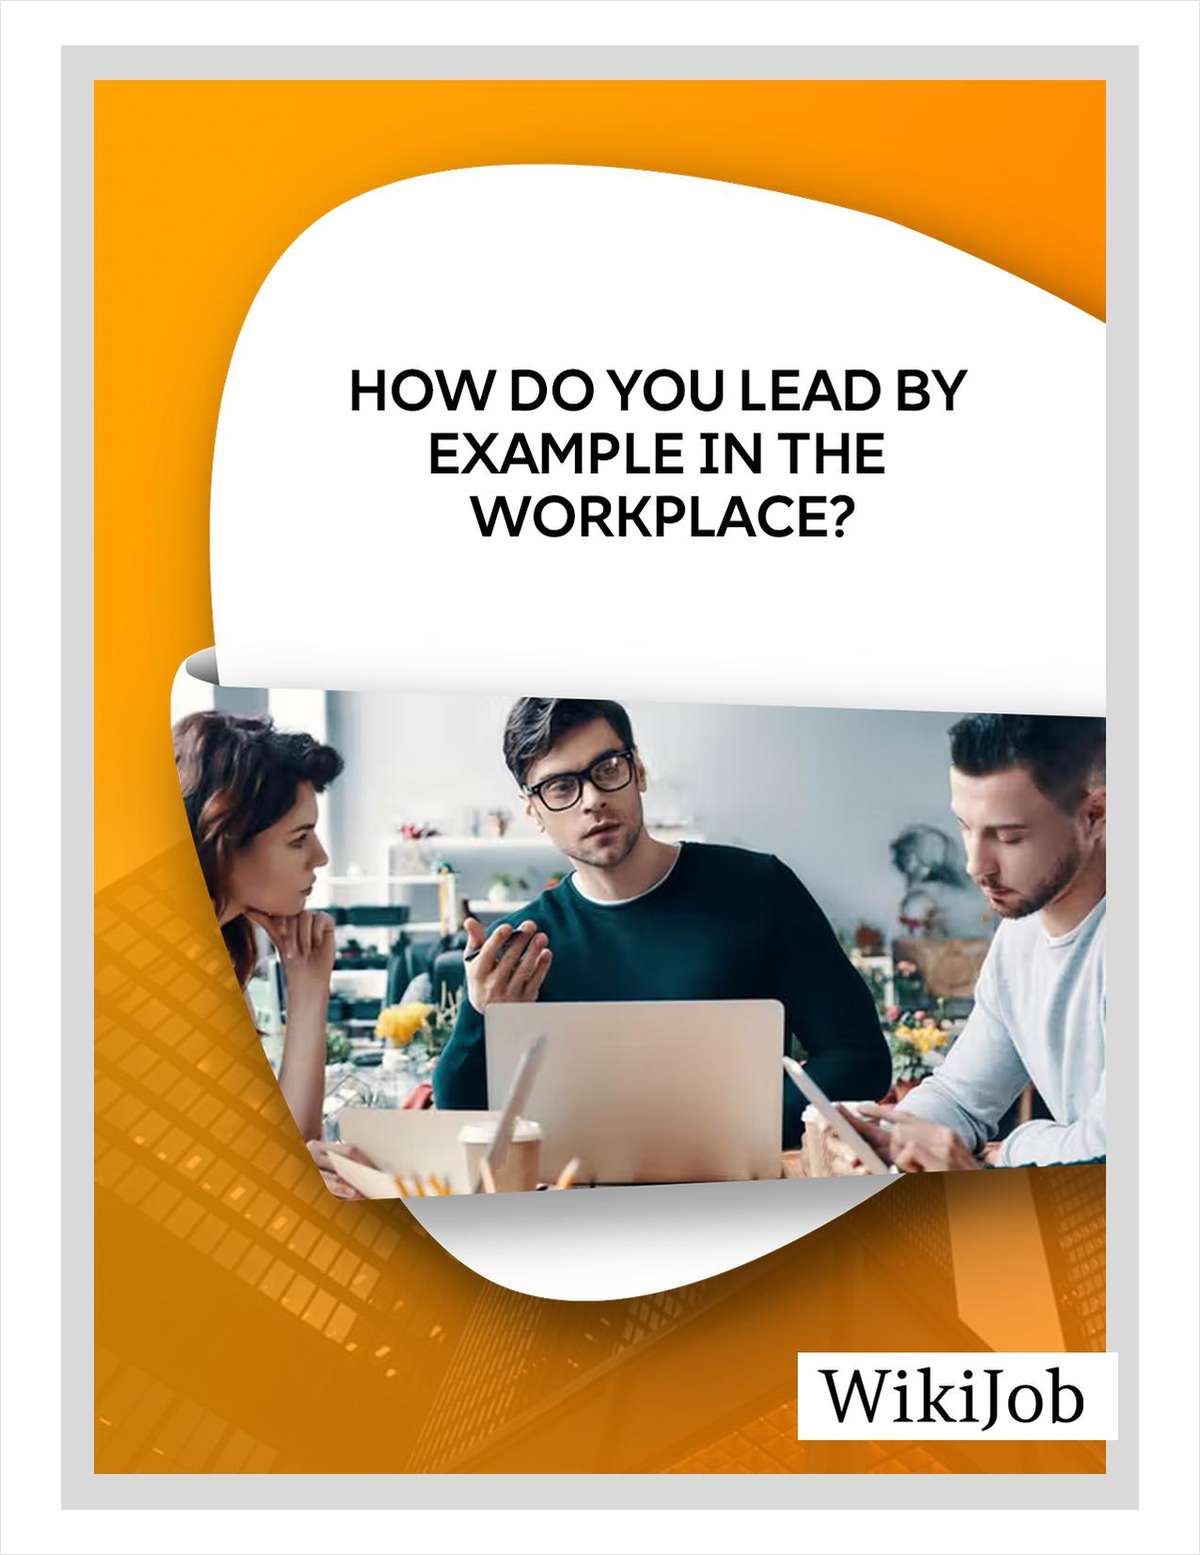 How Do You Lead by Example in the Workplace?